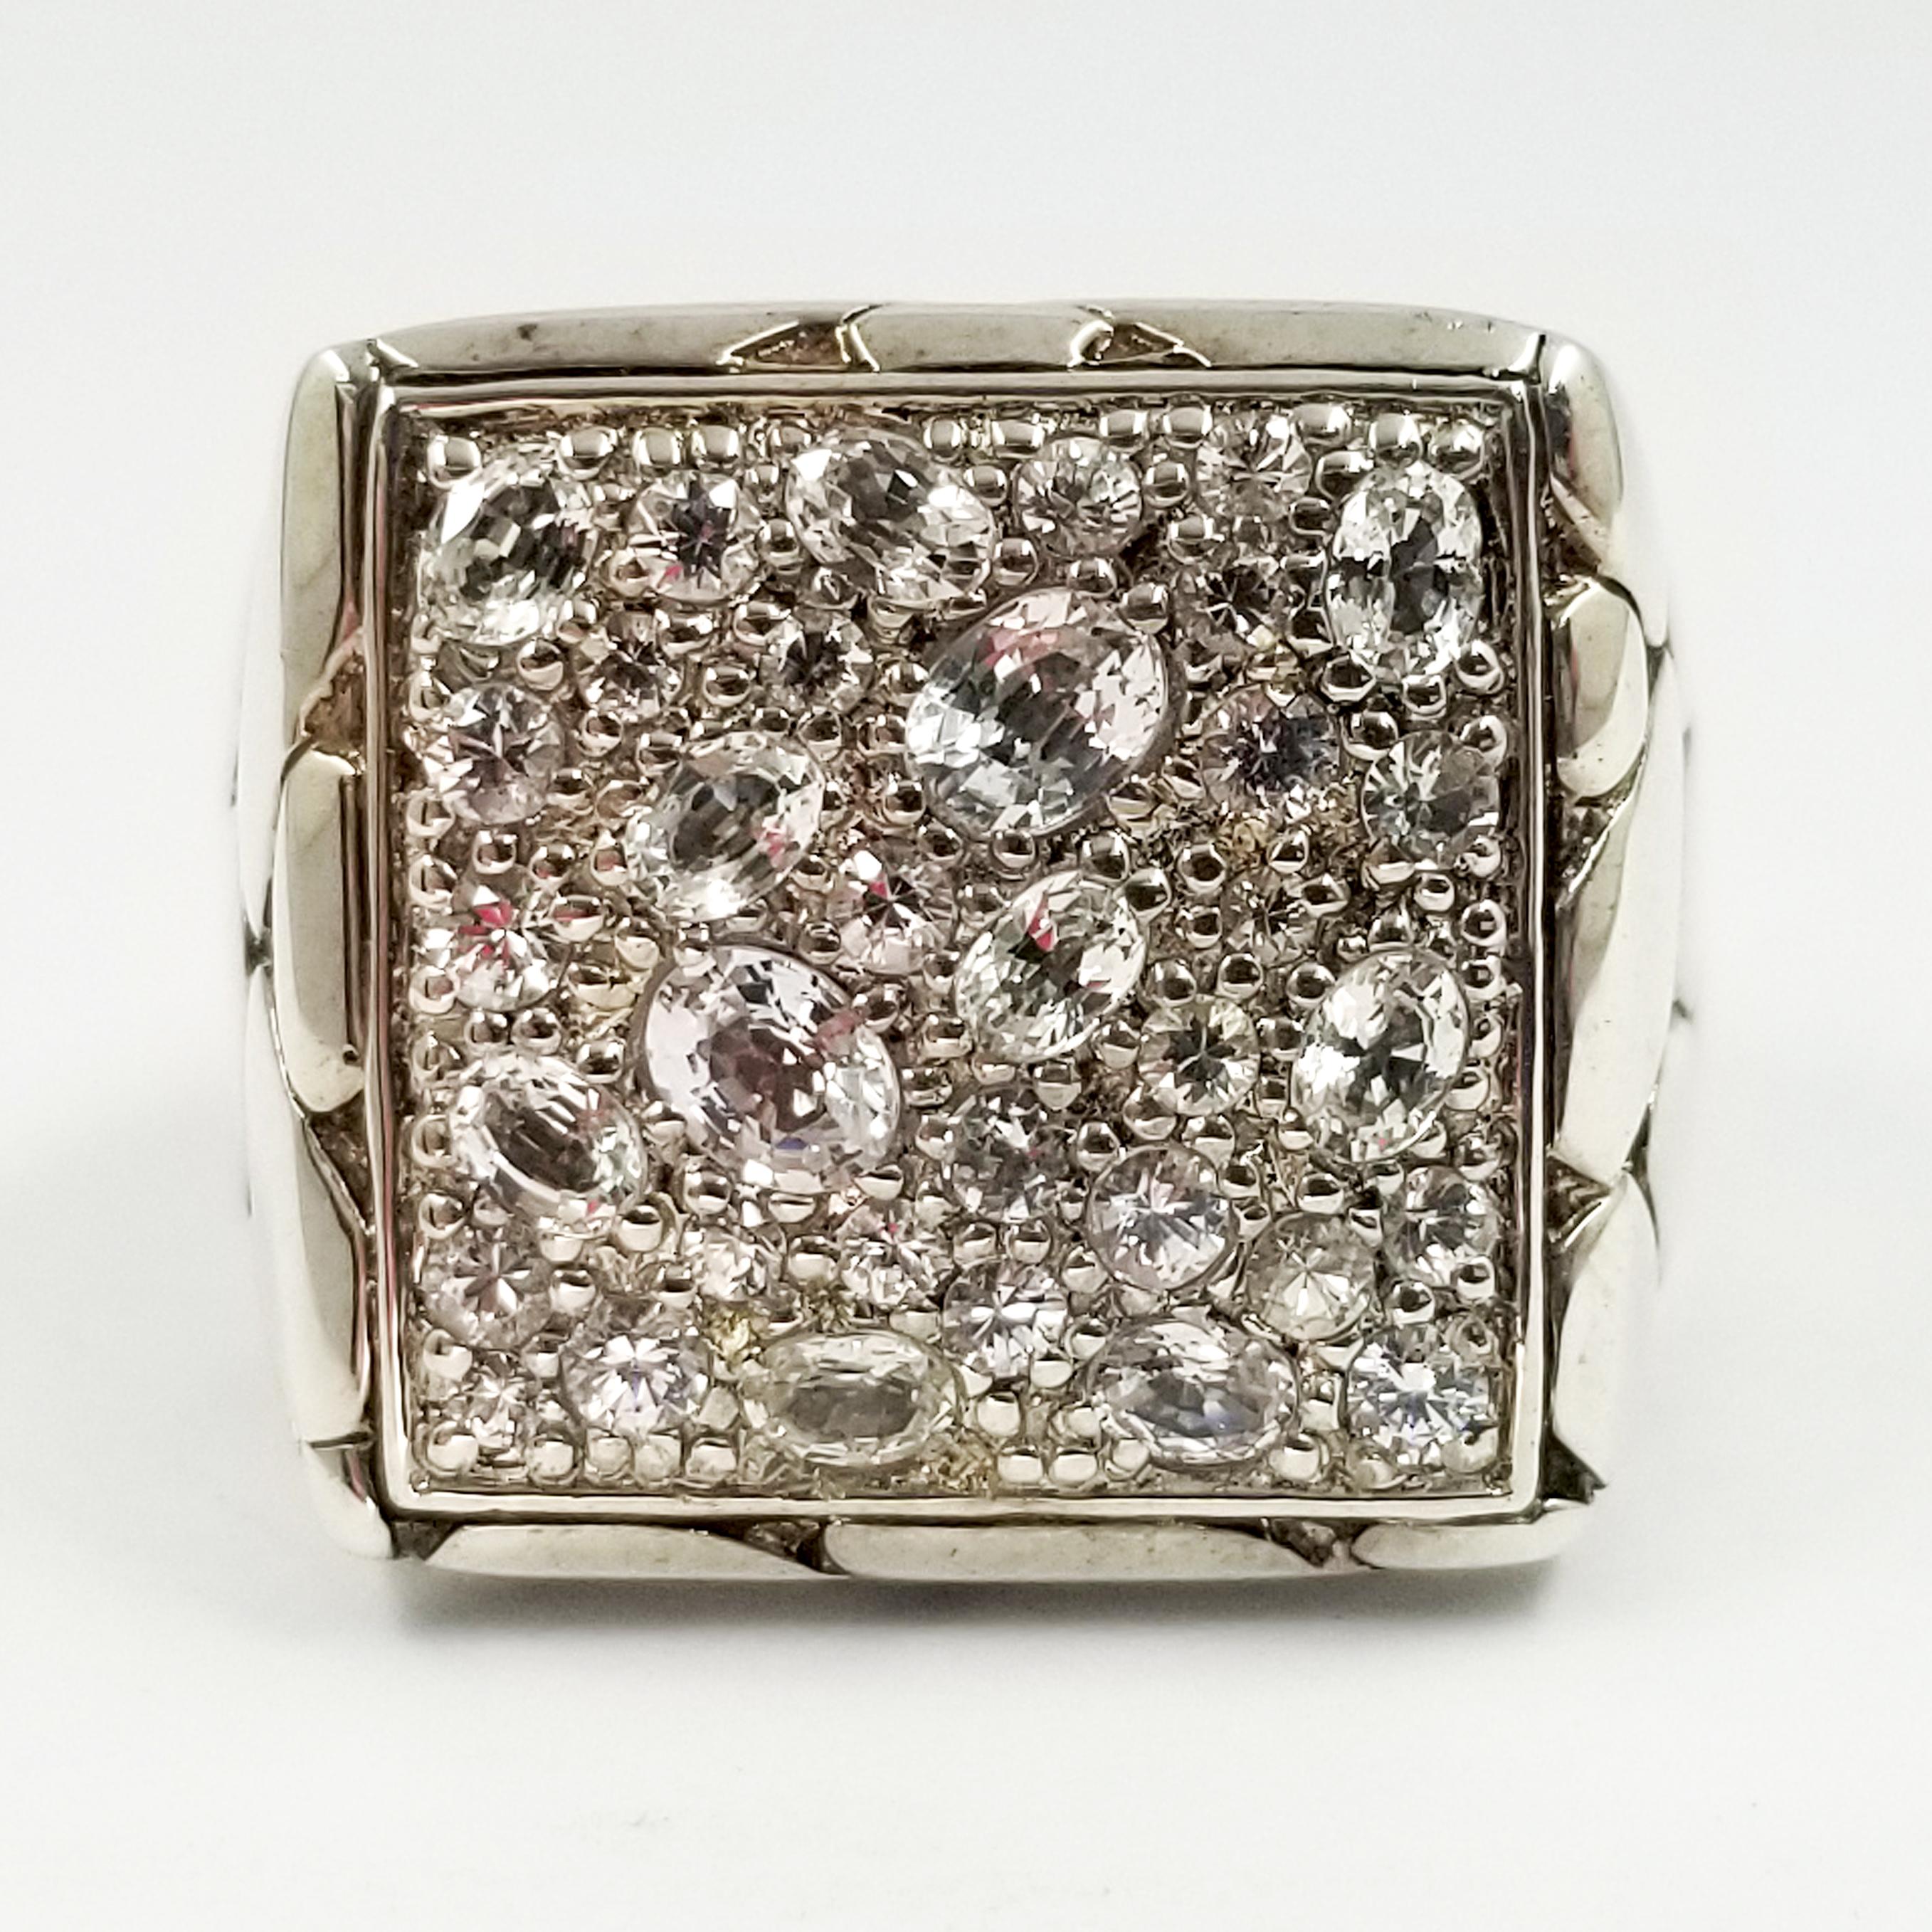 This sterling silver ring is hand assembled in Bali by the craftsmen at John Hardy. It is from the men's Kali jewelry collection, and features multiple prong-set faceted white sapphires on the top. The interior gallery is designed with a dragon